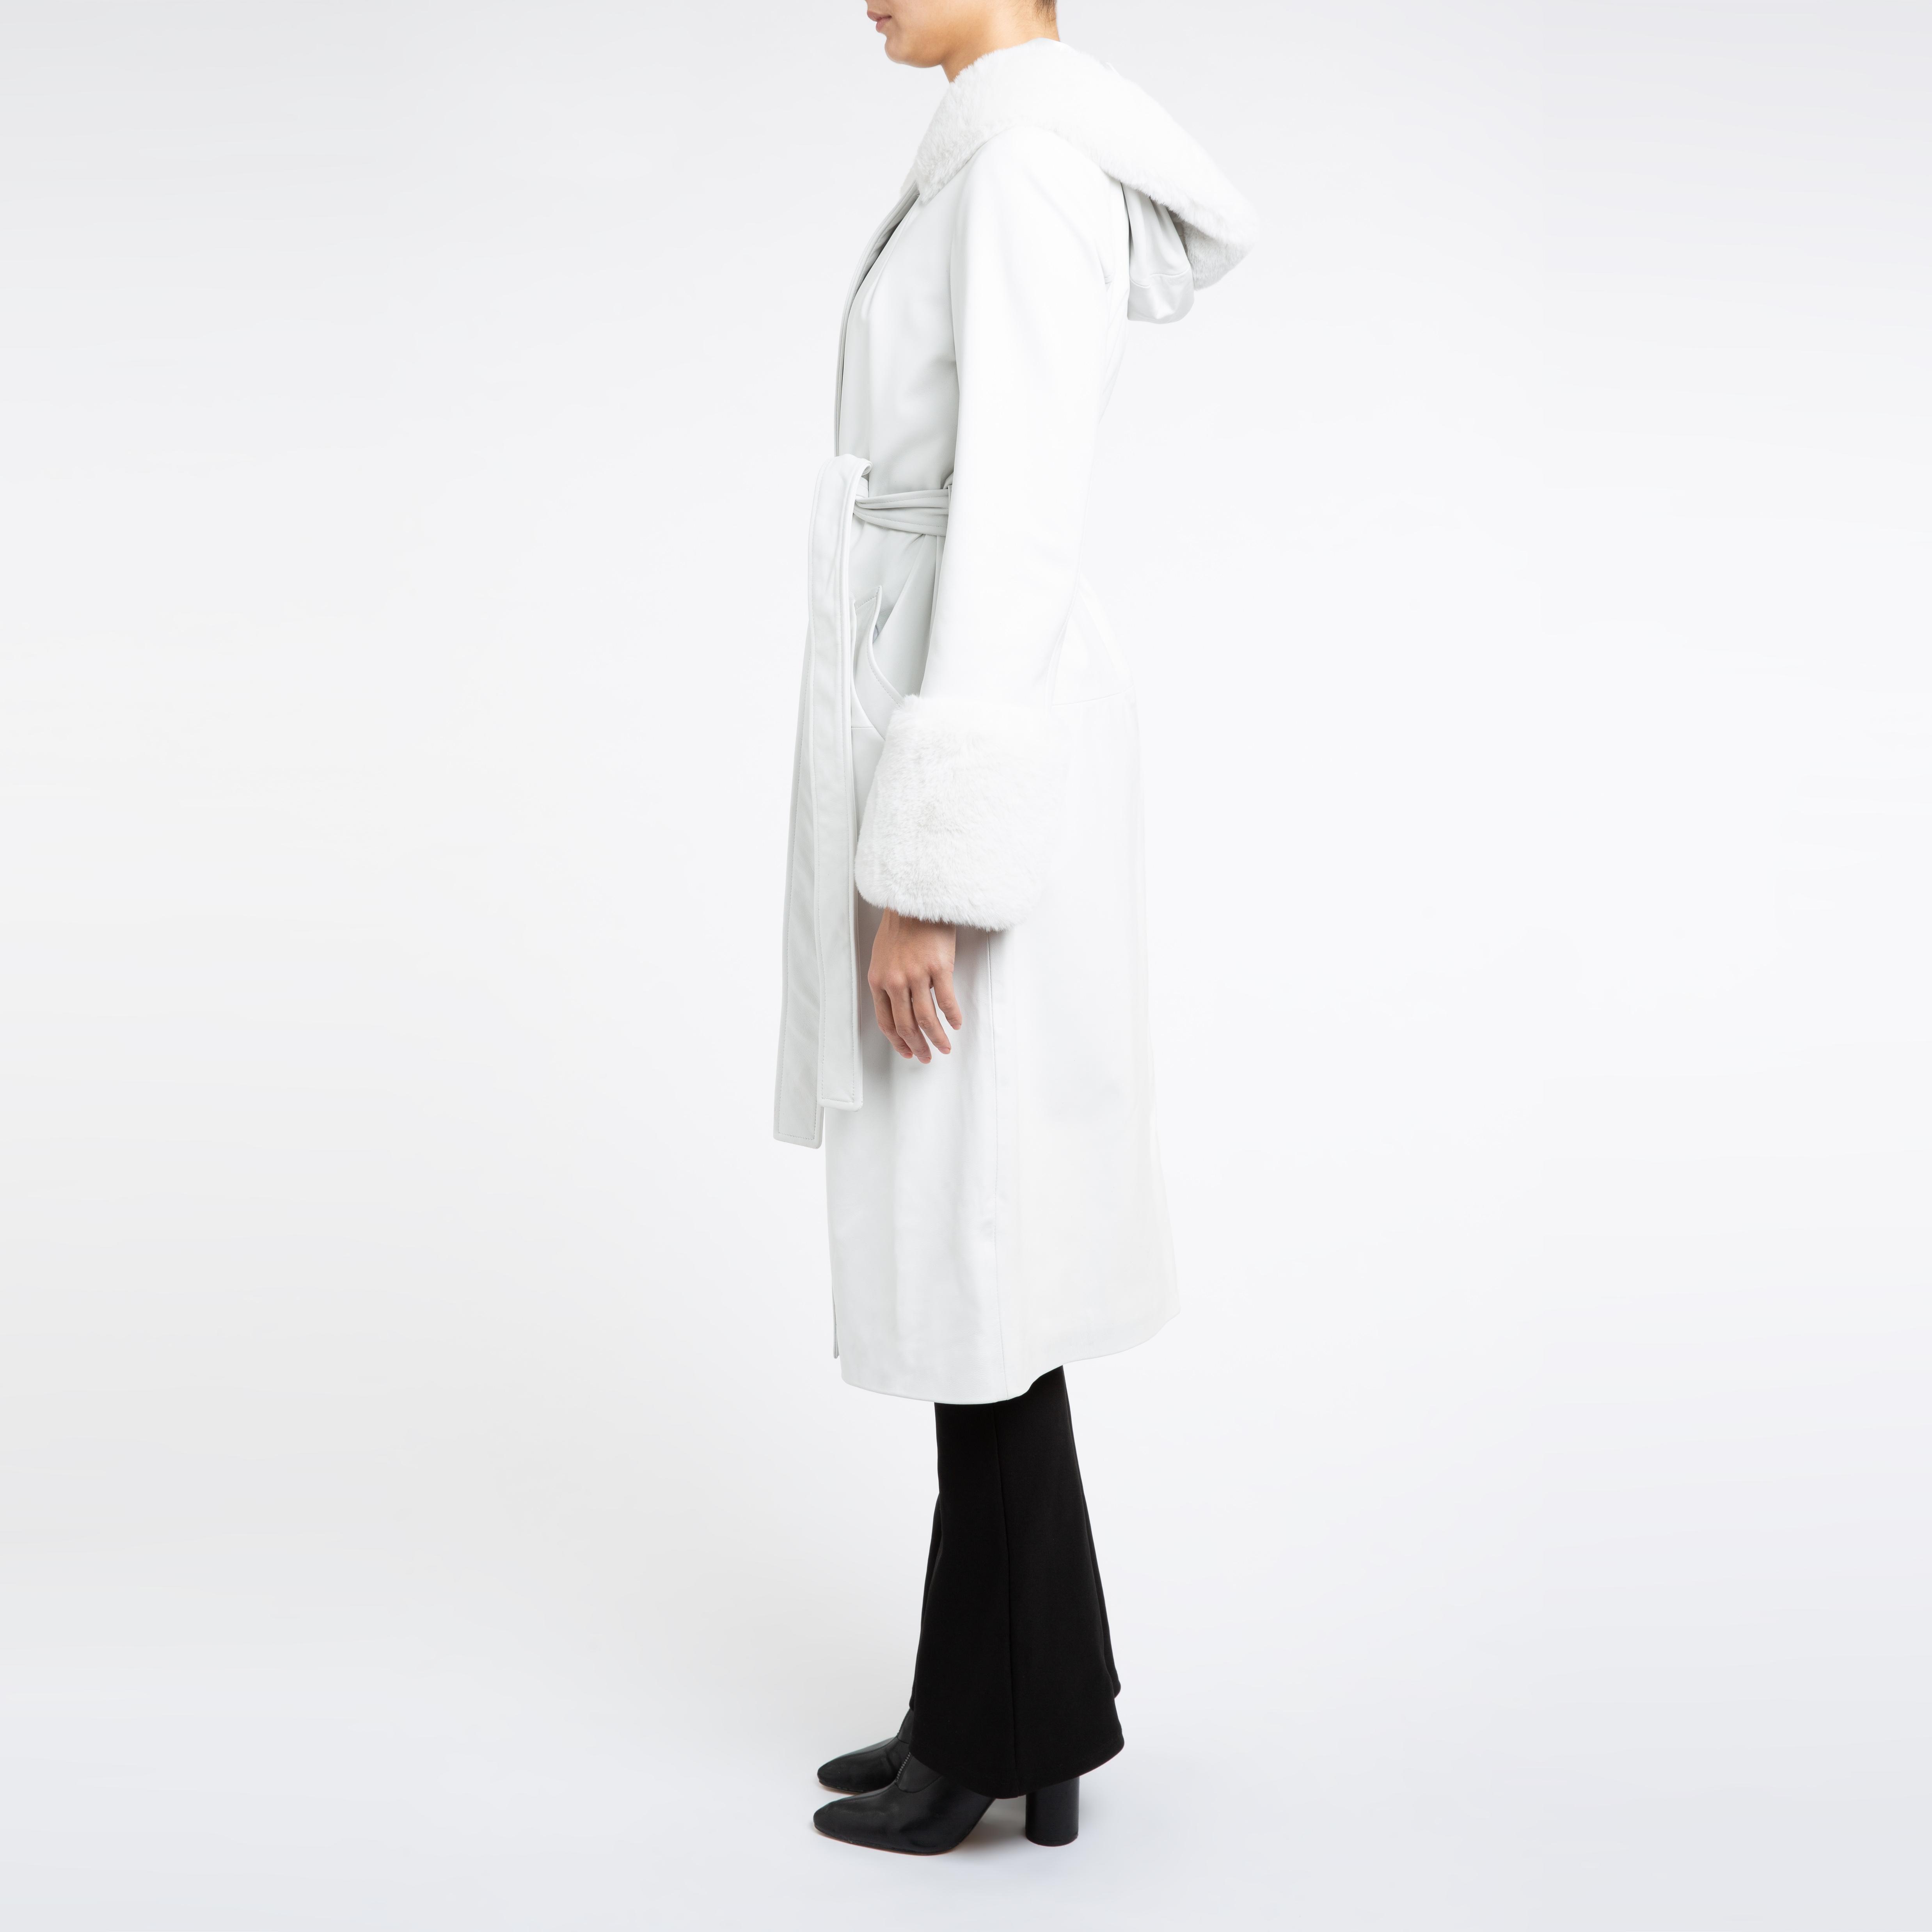 Verheyen Aurora Hooded Leather Trench Coat in White with Faux Fur - Size uk 10 For Sale 2